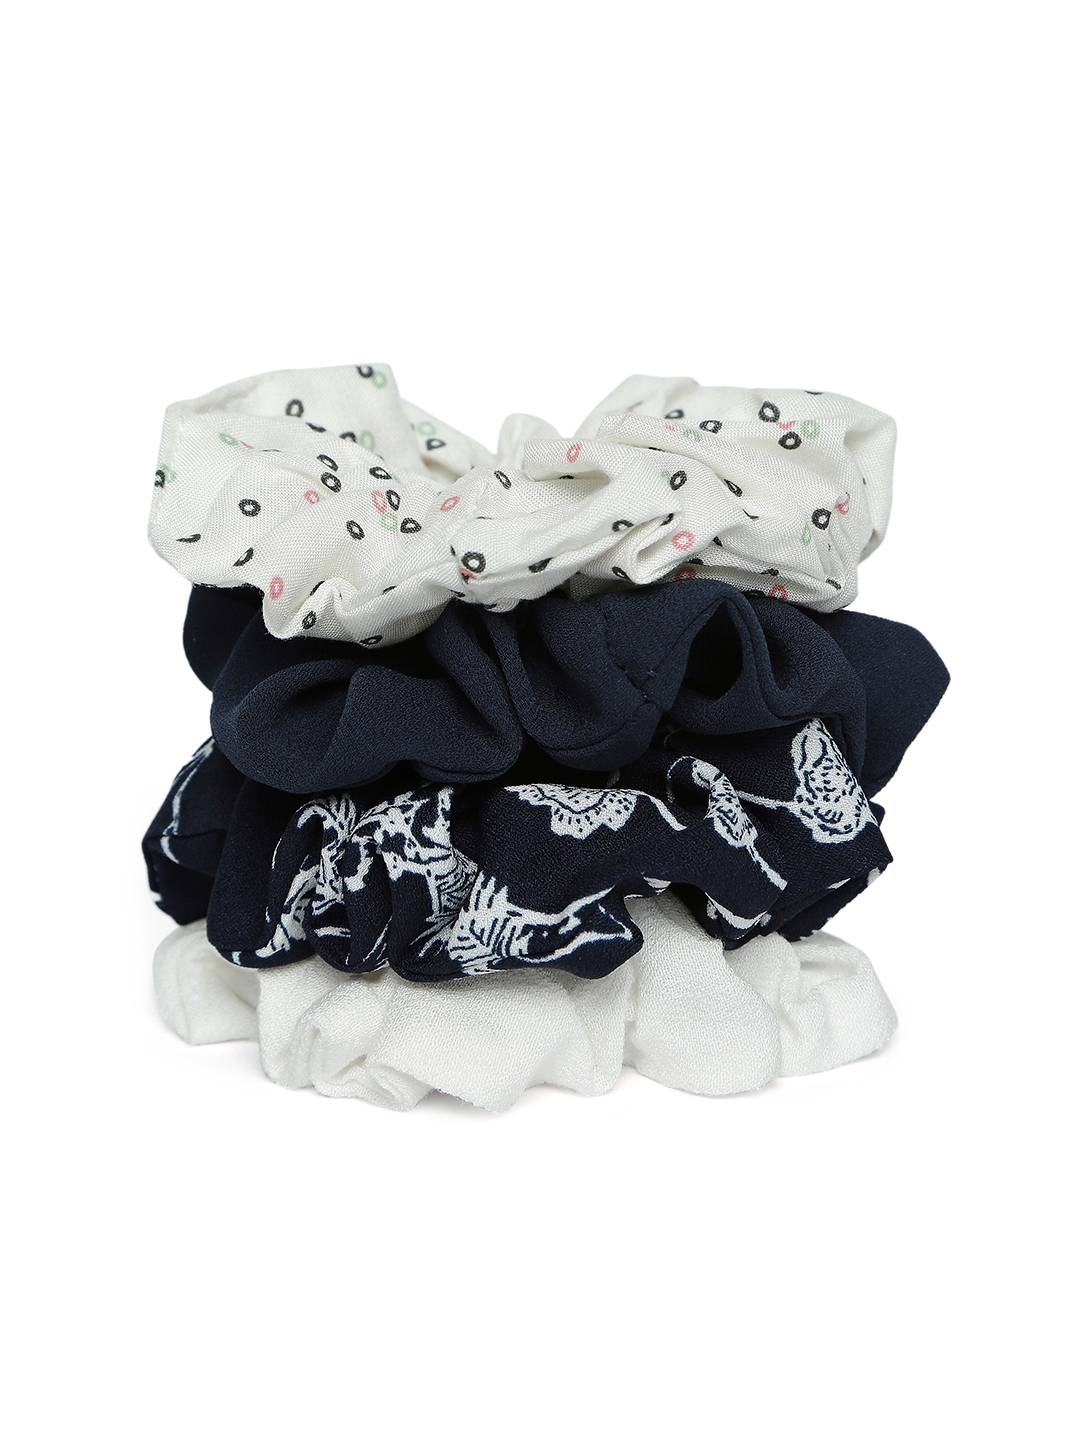 Lilly & sparkle | Lilly & Sparkle Navy Blue And White Scrunchies Set Of 4